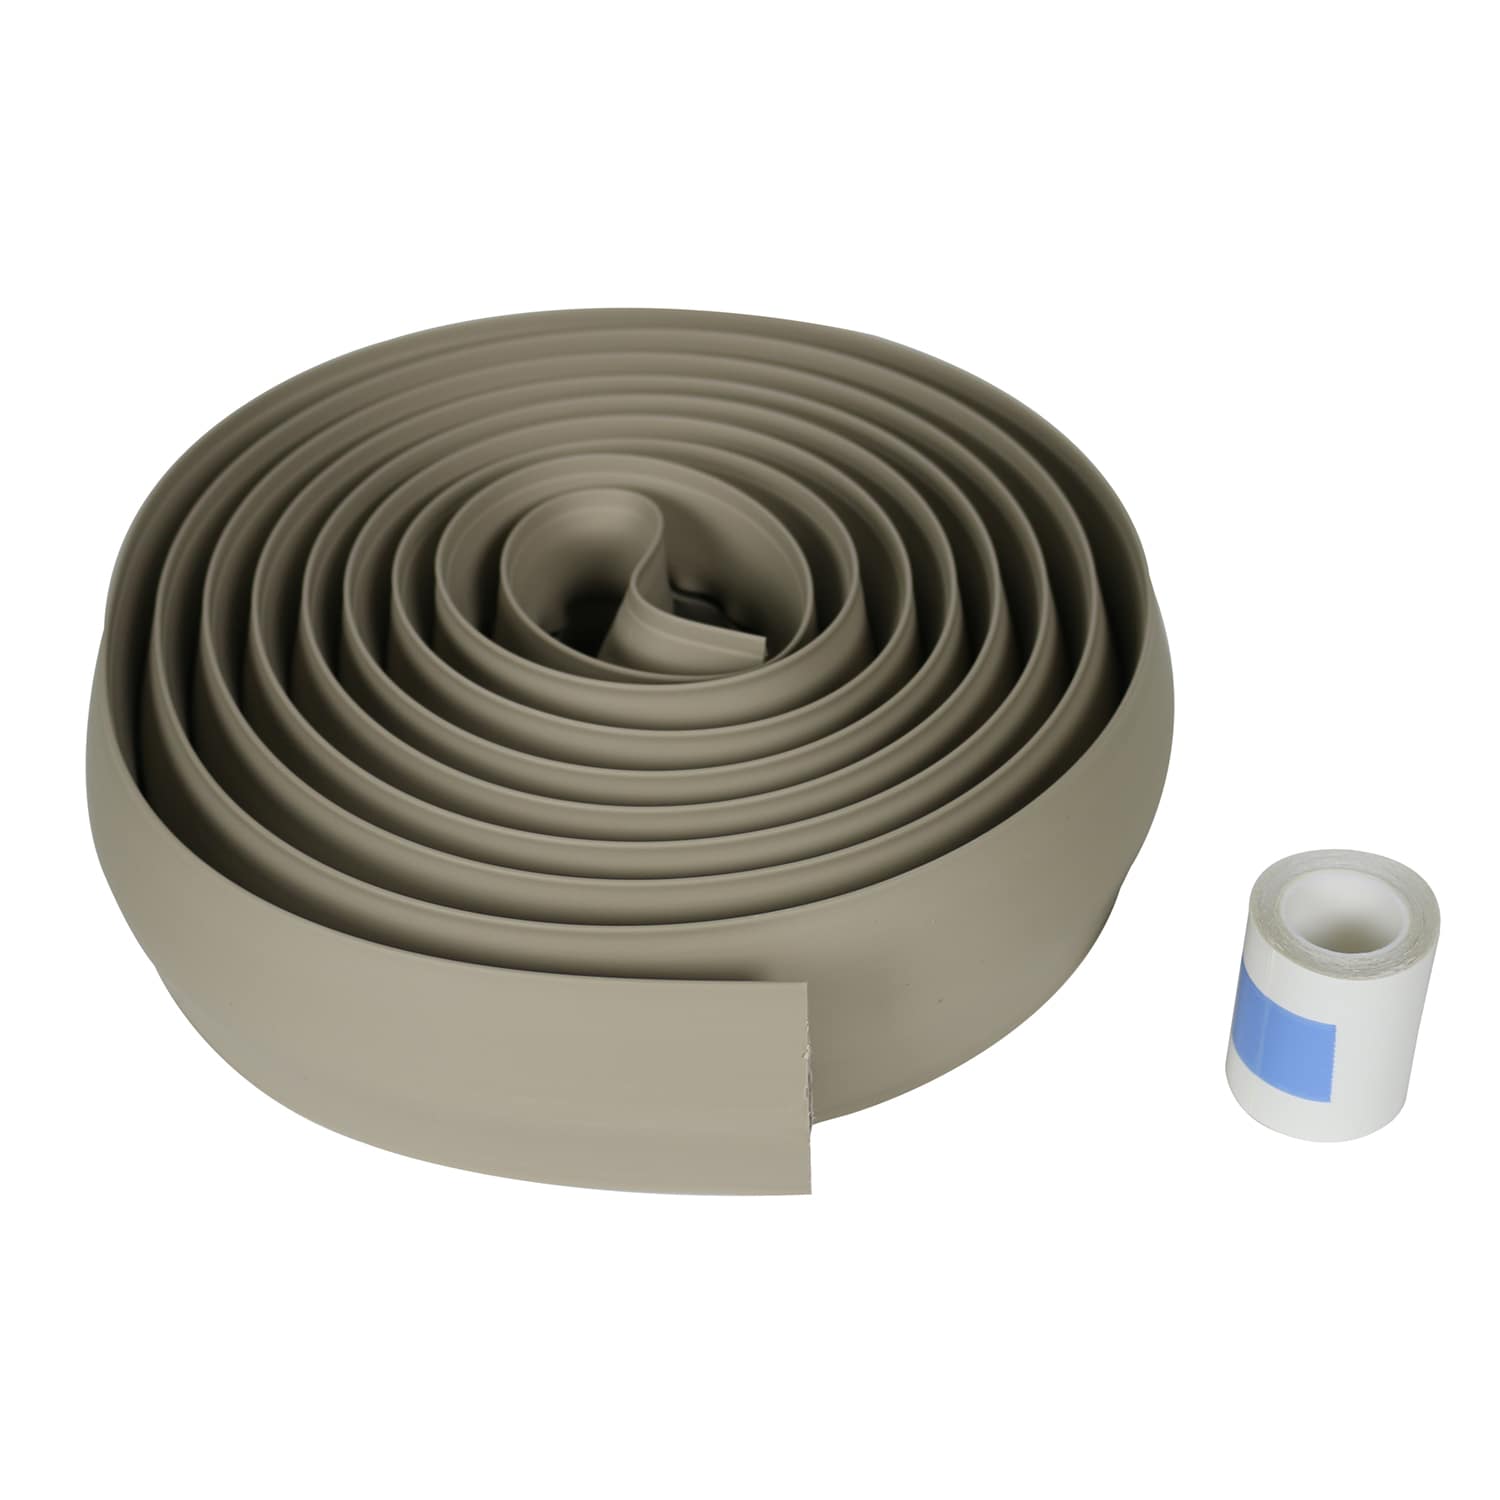 Cord Cover Floor 6ft Brown, Floor Cable Cover Extension Cord Hider, Floor  Cord Protector Prevent Cable Trips & Protect Wires, Floor Cable Management